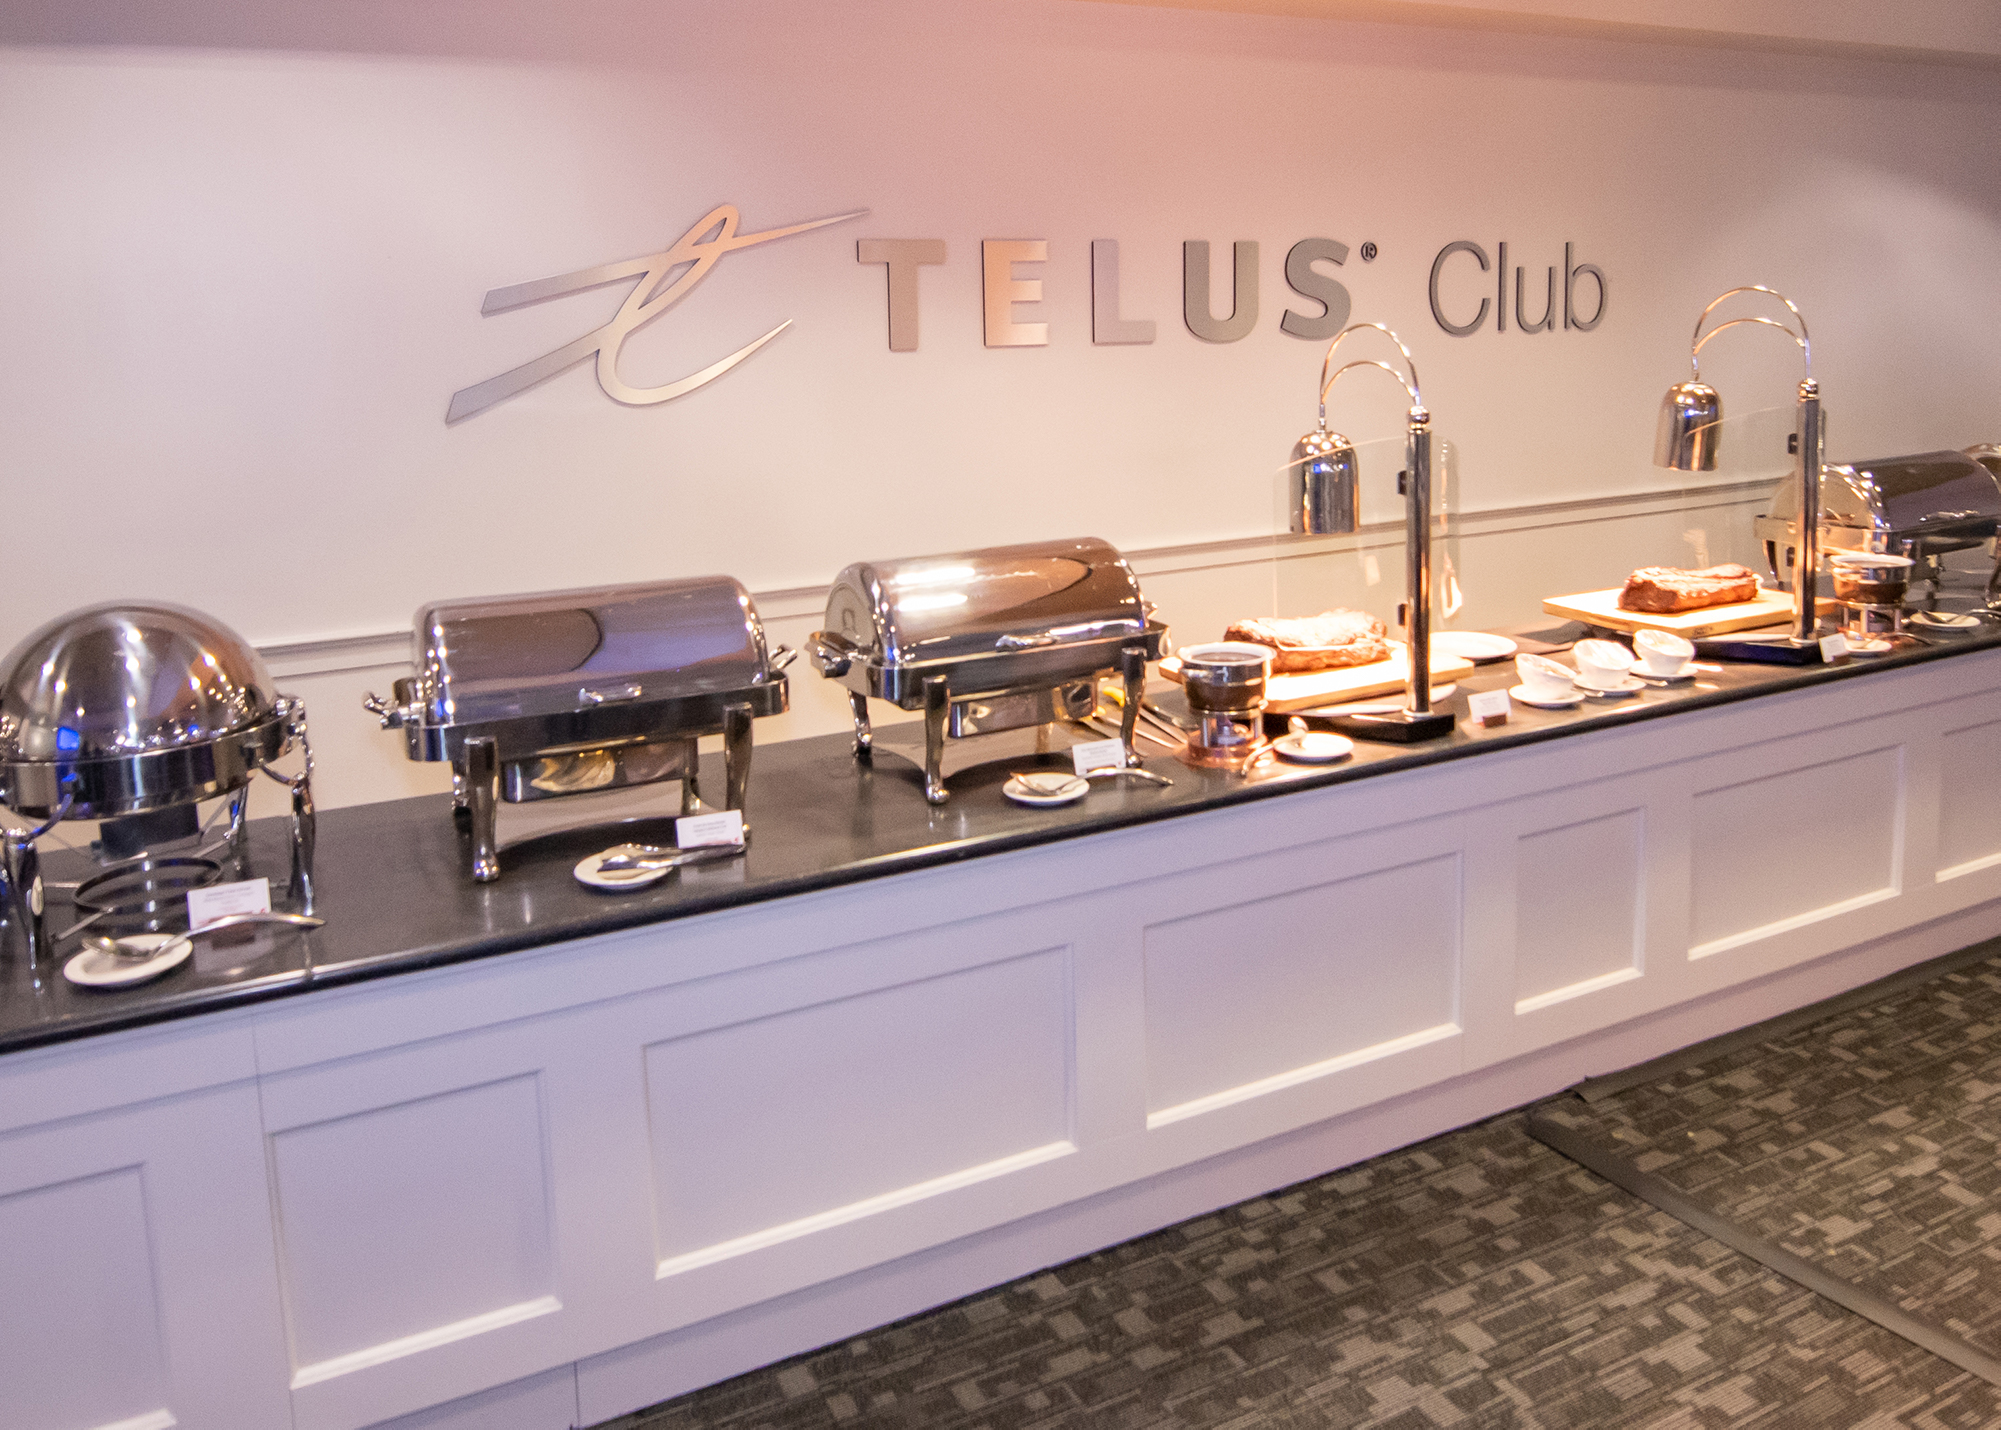 Inside the Telus Club with a buffet bar laid out in the foreground and the Telus Club logo on the wall in the background